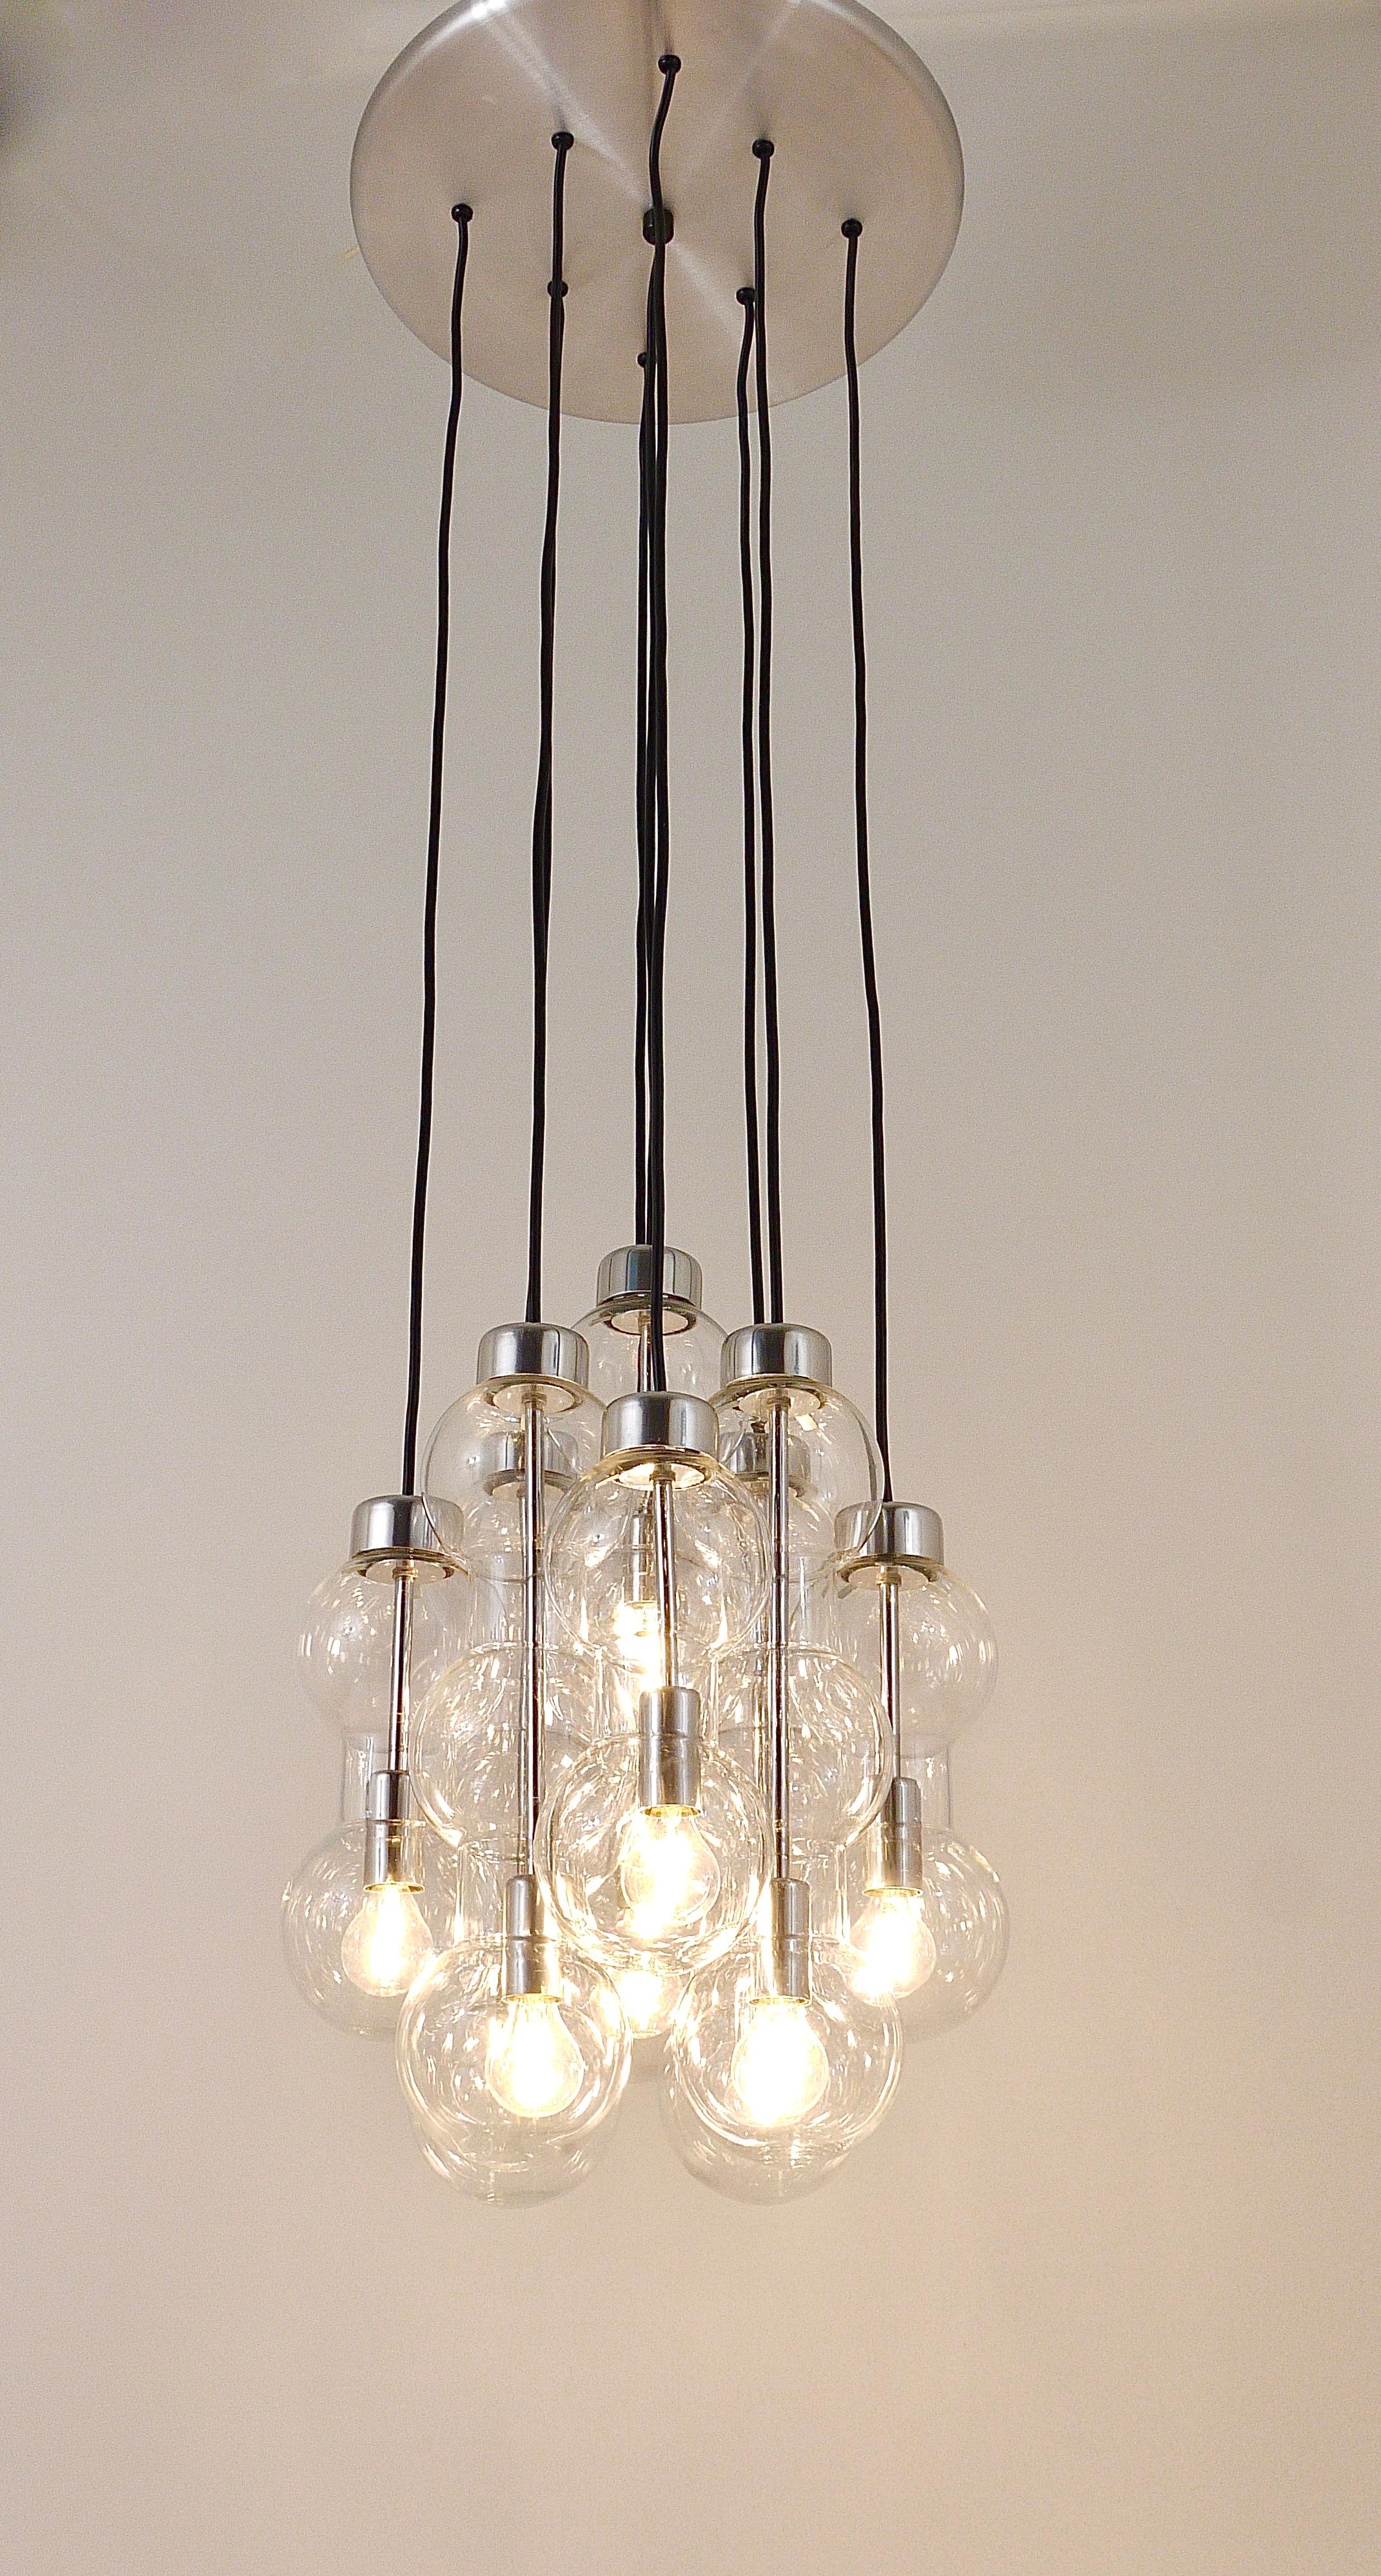 Impressive Doria Cascading Hourglass Chandelier, Space Age, Germany, 1960s For Sale 3